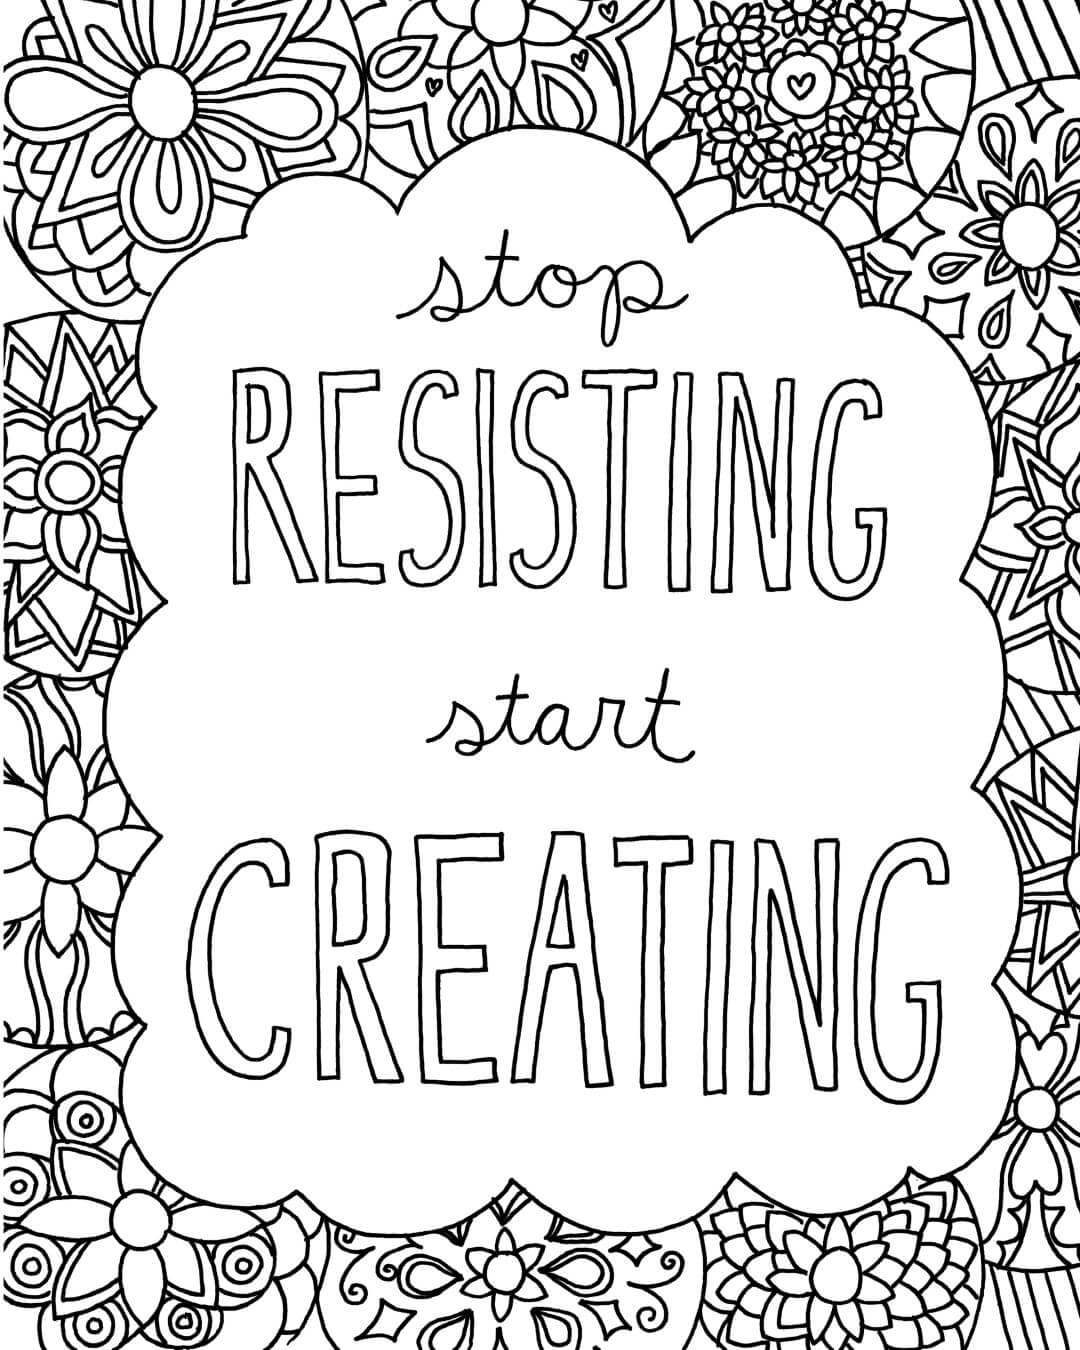 Coloring Quote About Creating